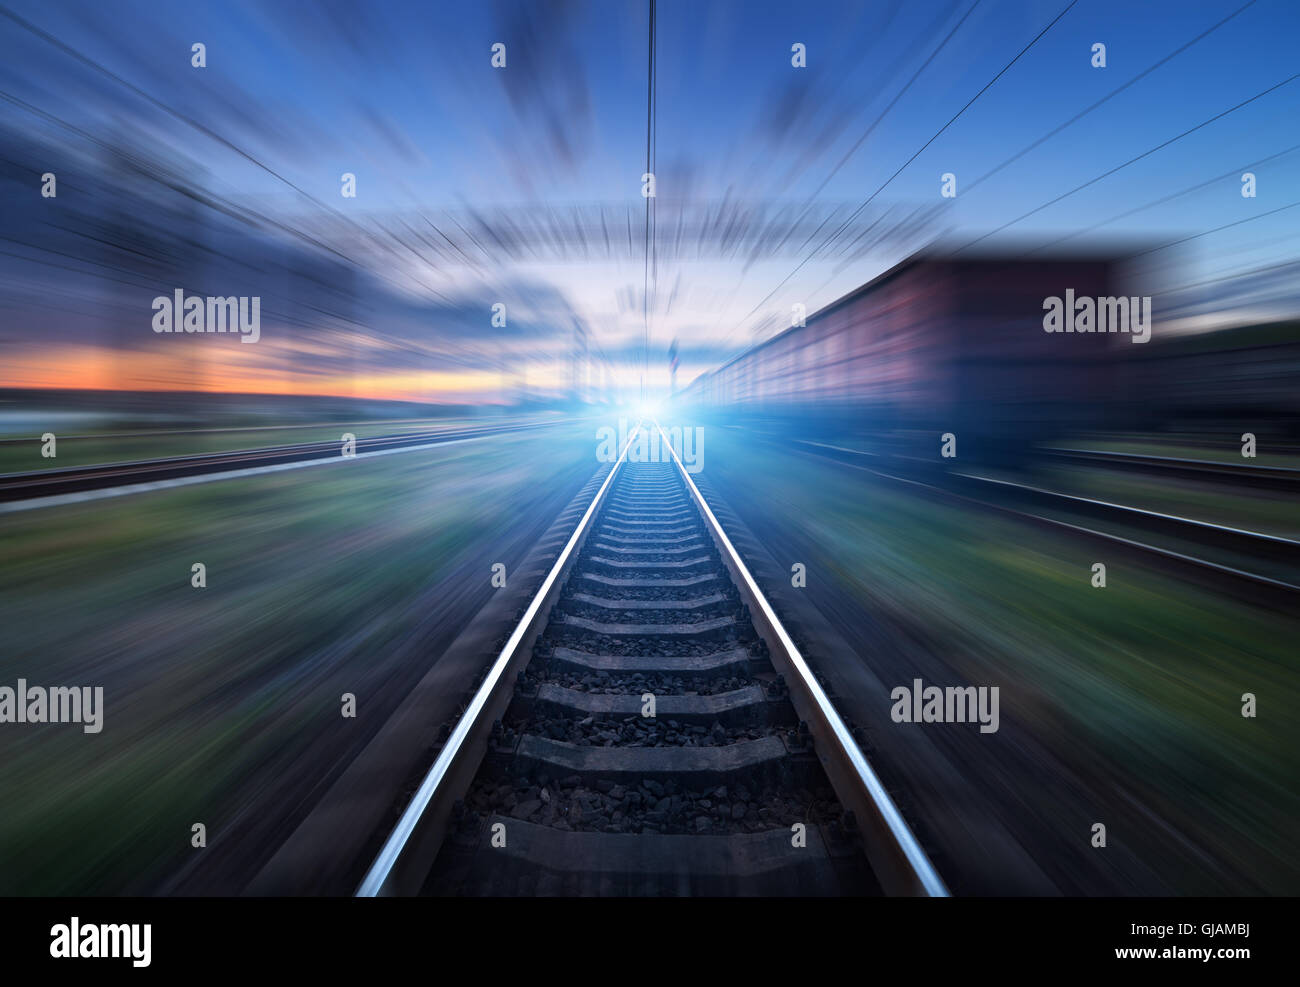 Railway station with cargo wagons in motion at sunset. Railroad with motion blur effect. Railway platform at dusk. Stock Photo